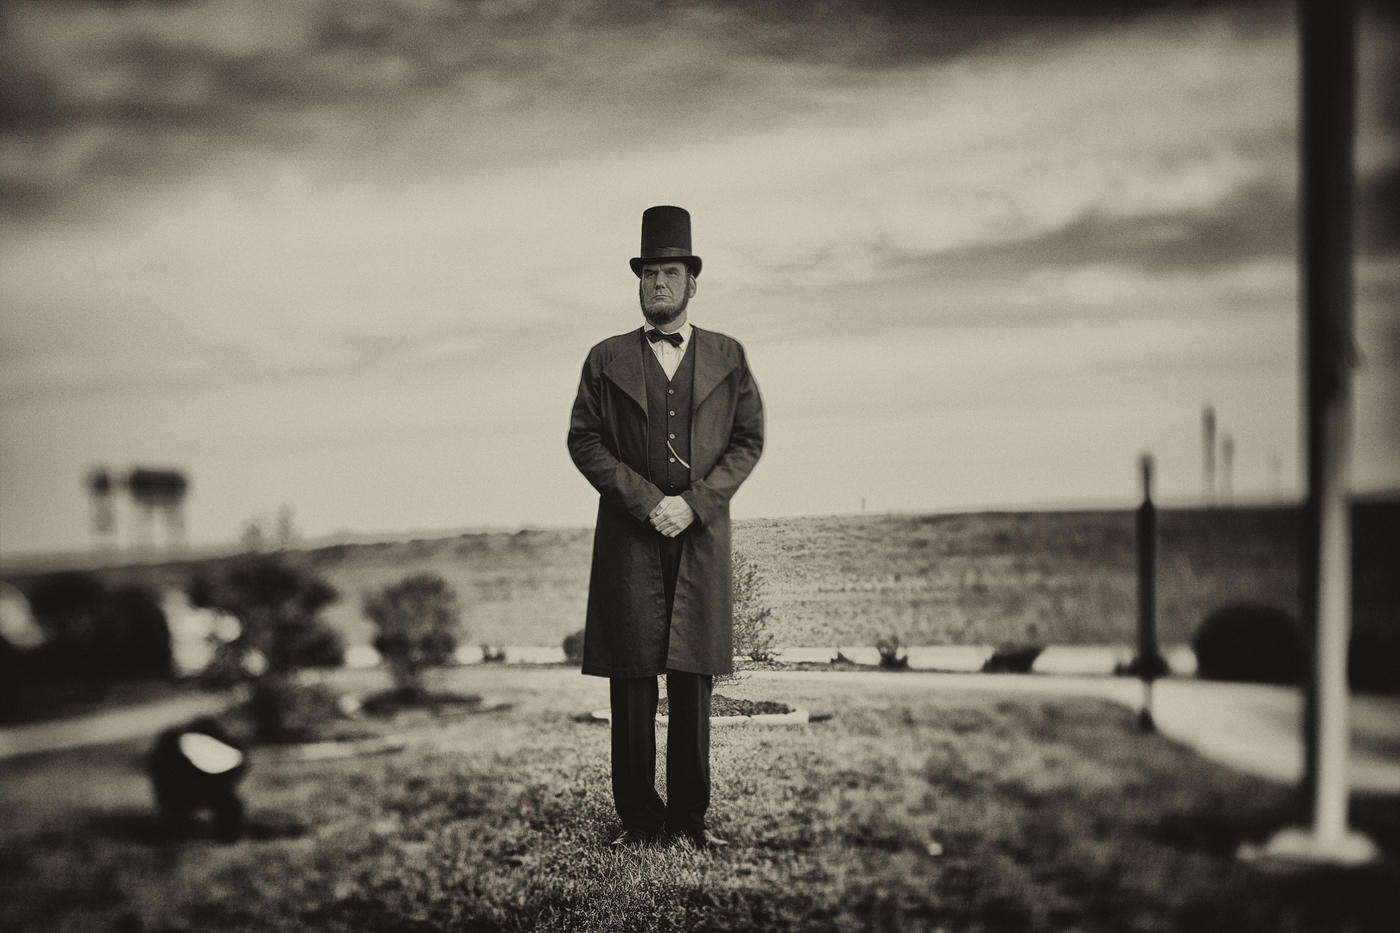 James Mitchell, as Abe Lincoln. In April 2015, the Association of Lincoln Presenters met in Vandalia IL - the first ILLINOIS state capital. : The  Lincolns - a Convention : David Burnett | Photographer